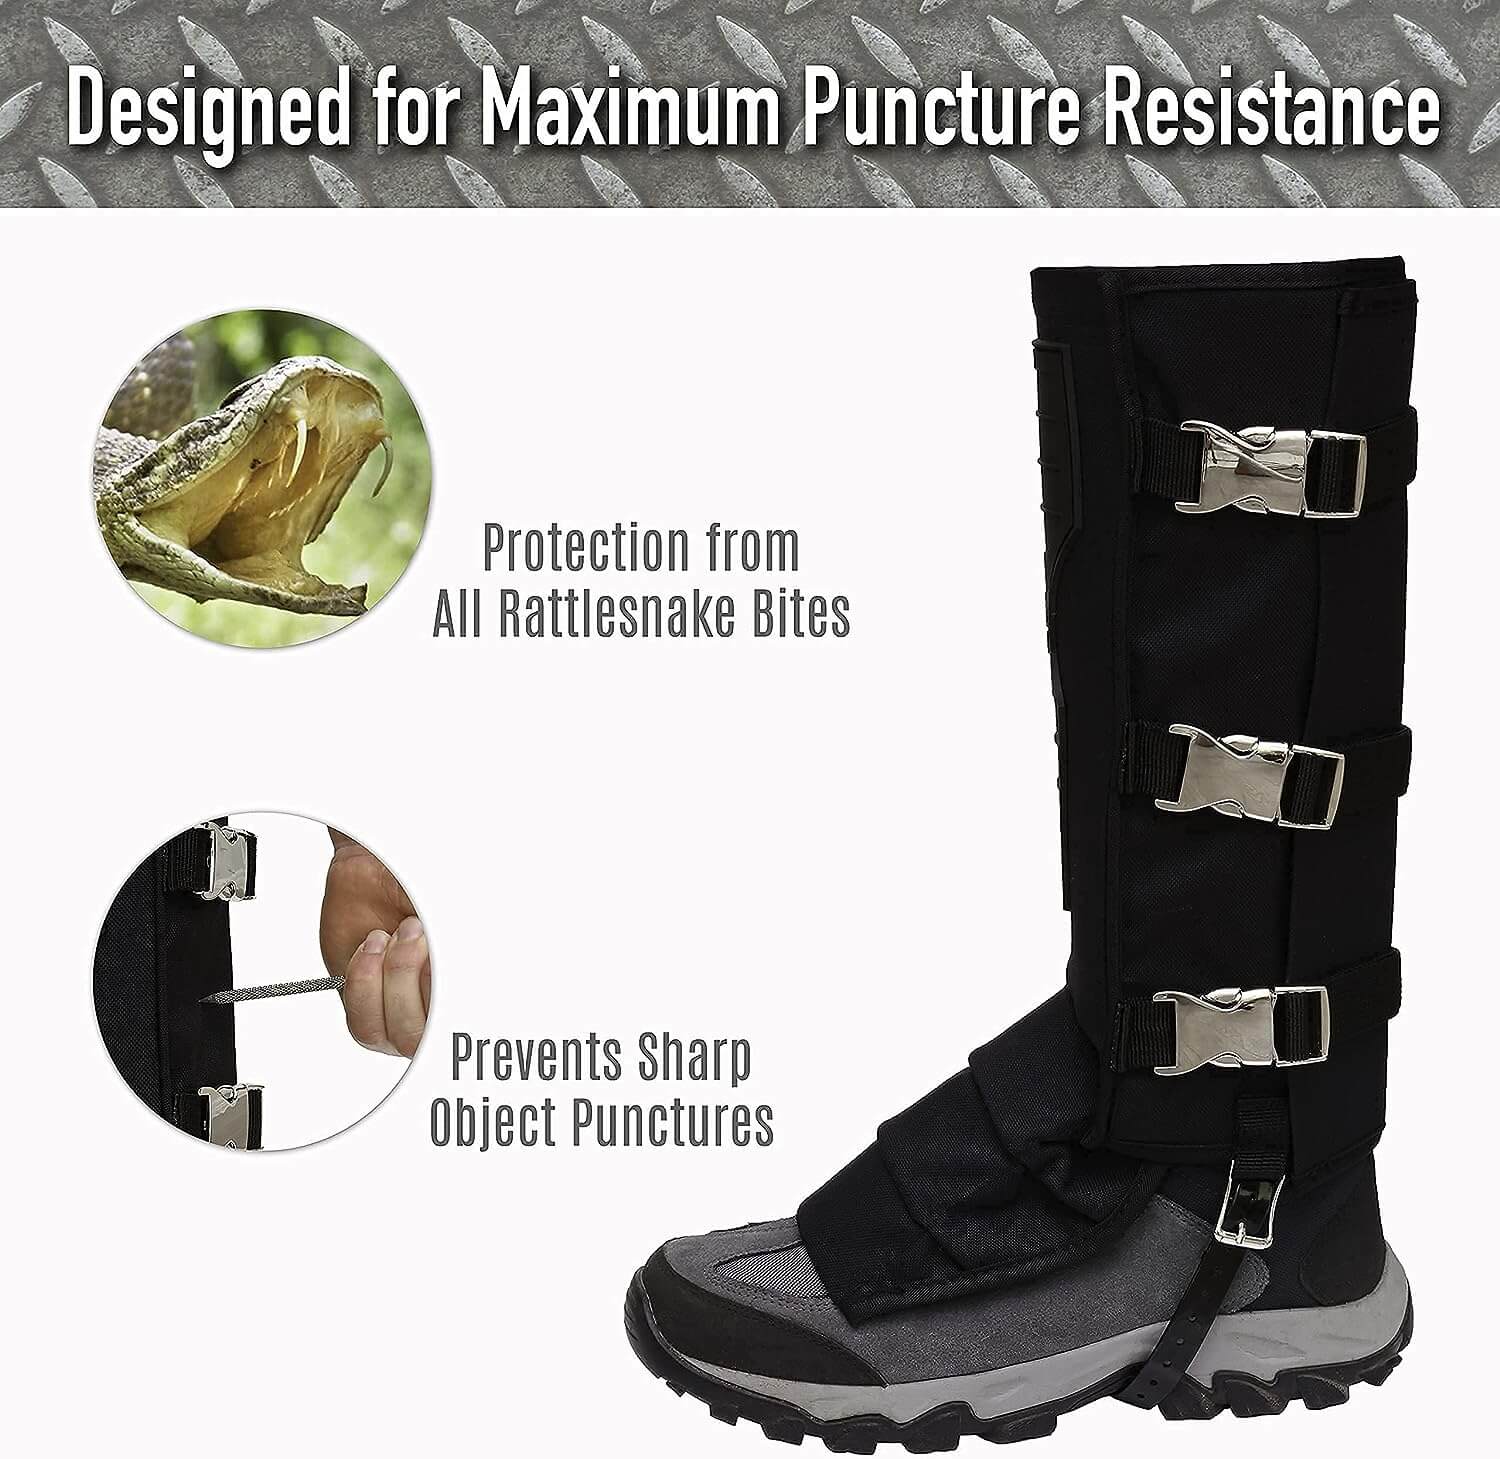 Shop The Latest >Pike Trail Snake Gaiters Leg Guards for Snake Bite Protection > *Only $68.99*> From The Top Brand > *Pike Traill* > Shop Now and Get Free Shipping On Orders Over $45.00 >*Shop Earth Foot*